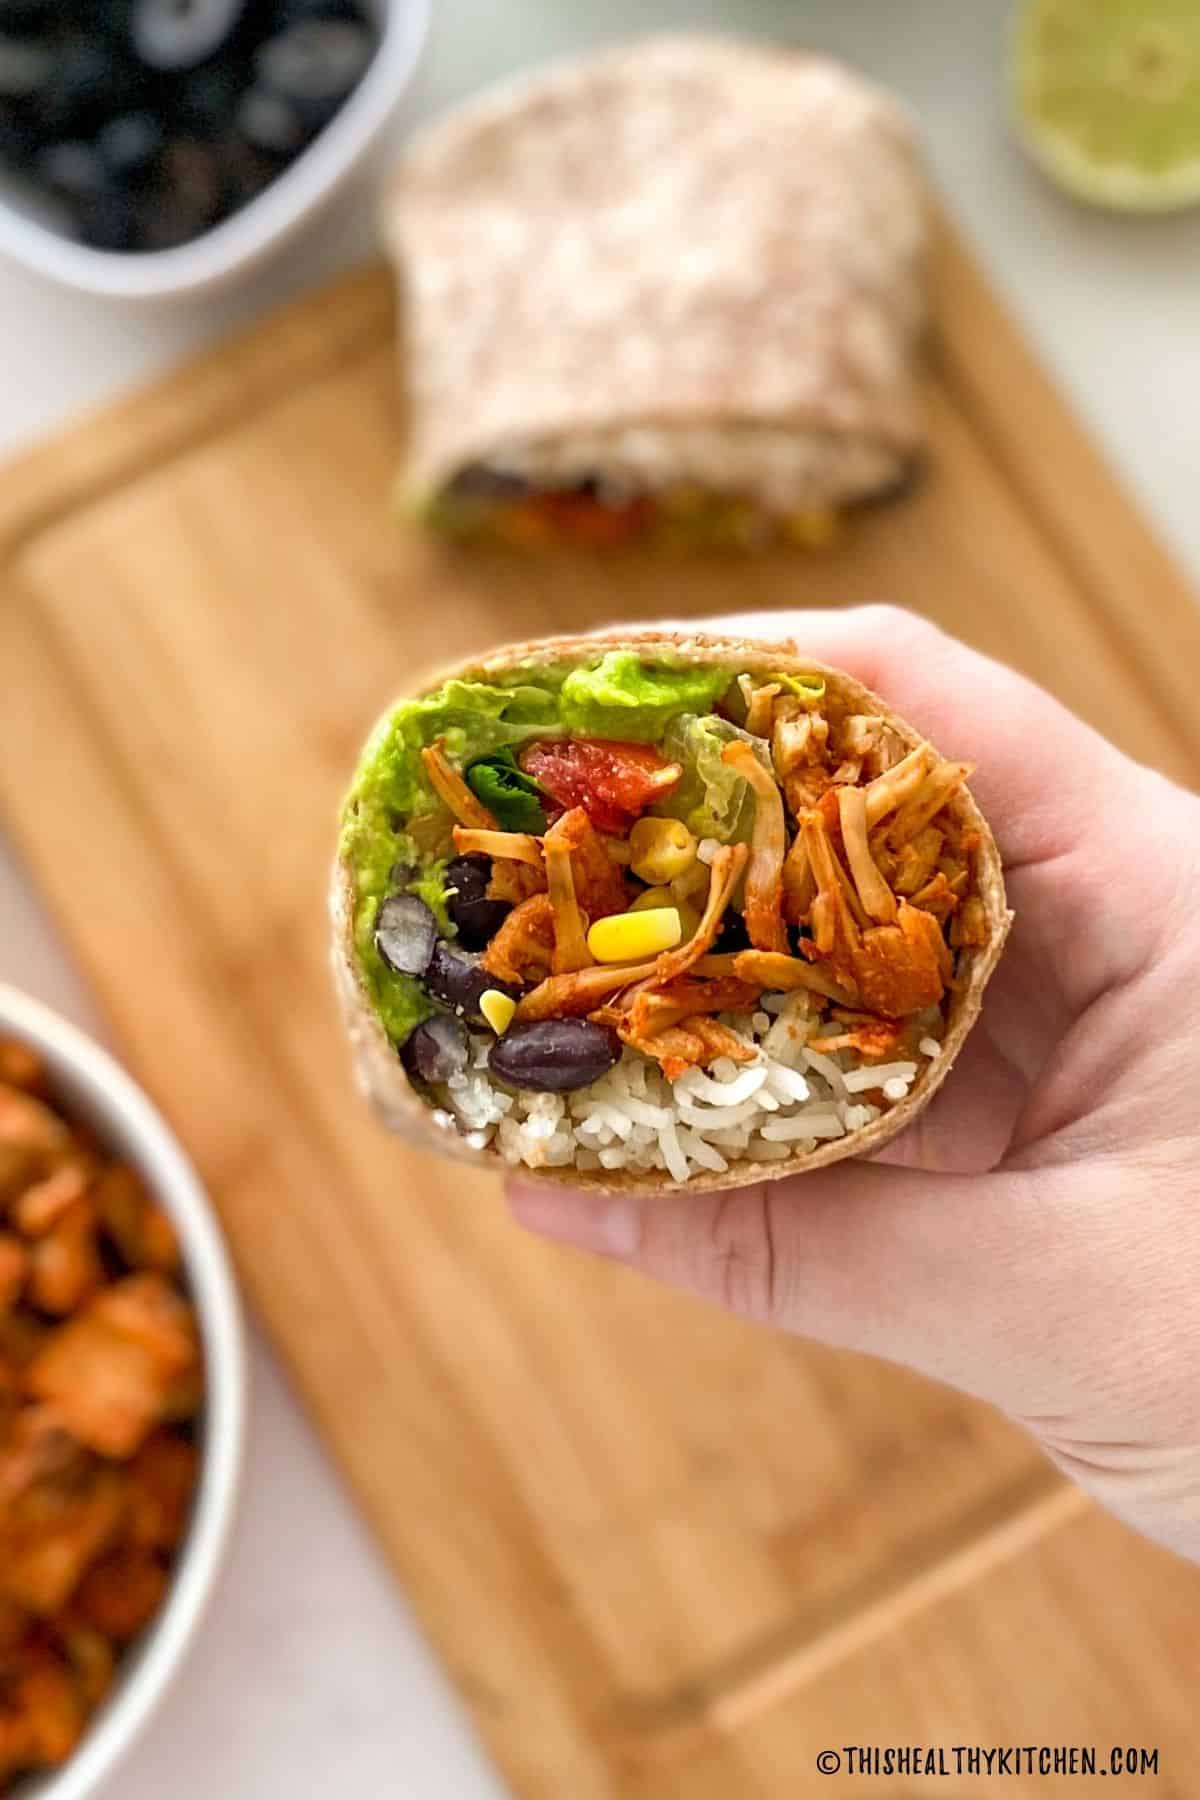 Halved vegan burrito held up in hand with remaining half on cutting board below.